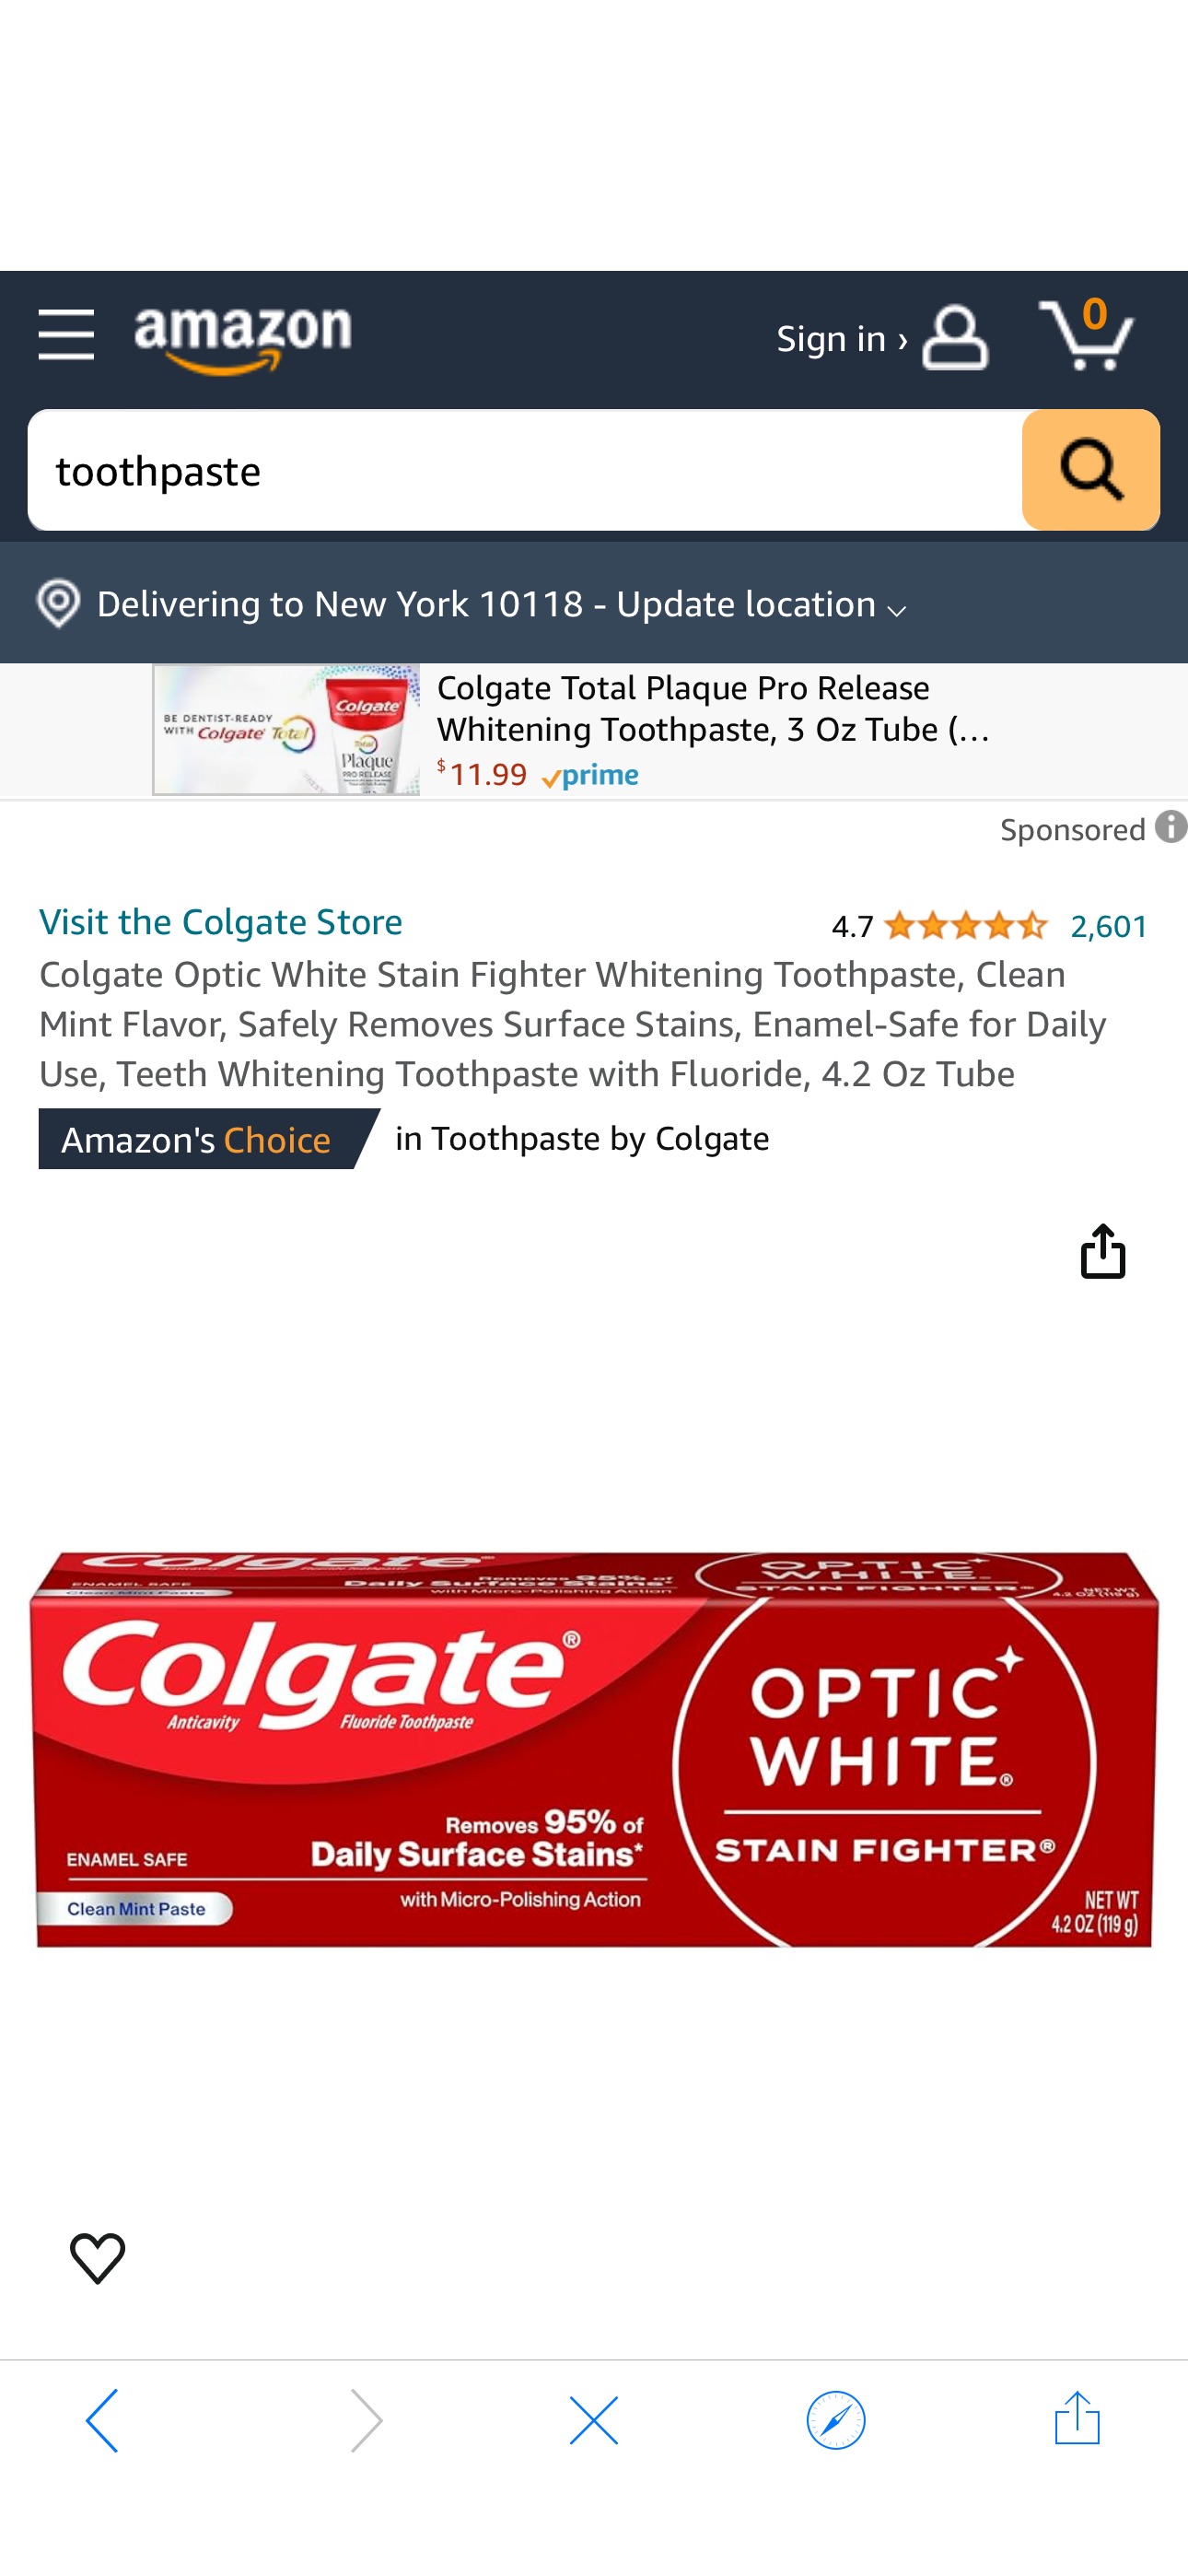 Amazon.com : Colgate Optic White Stain Fighter Whitening Toothpaste, Clean Mint Flavor, Safely Removes Surface Stains, Enamel-Safe for Daily Use, Teeth Whitening Toothpaste with Fluoride, 4.2 Oz Tube 